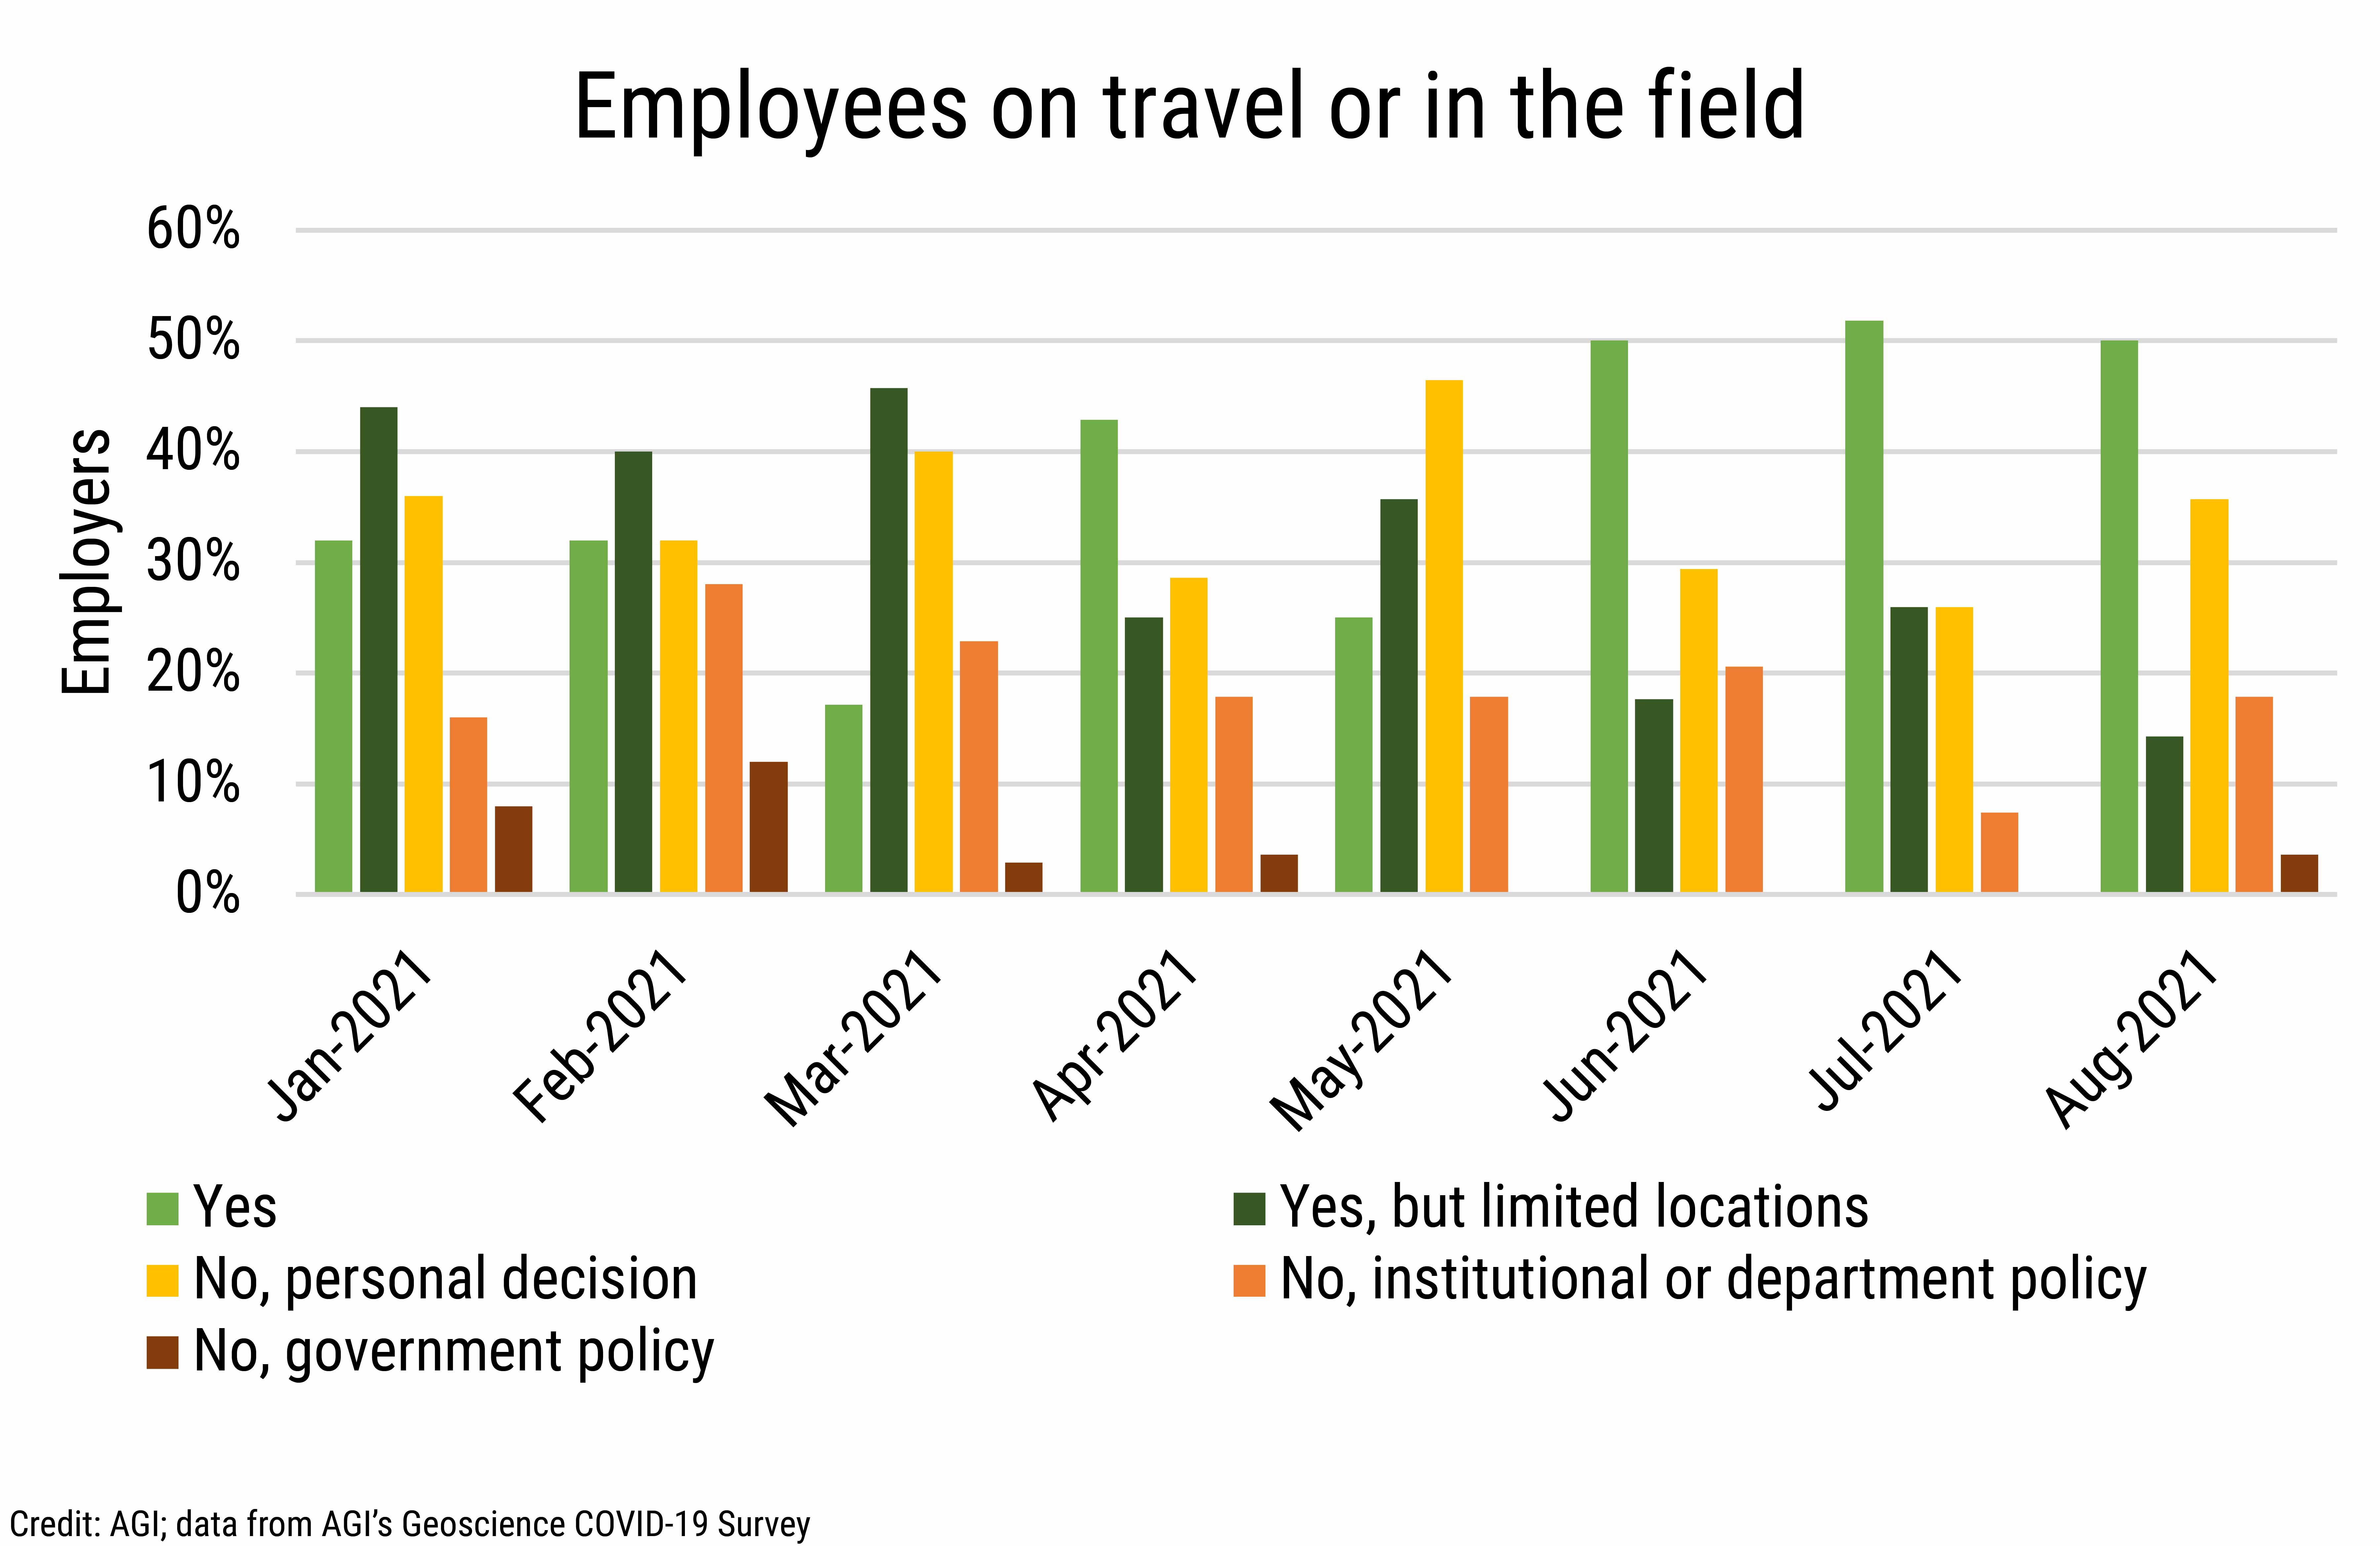 DB_2021-030 chart 04: Employees on travel or in the field (Credit: AGI; data from AGI's Geoscience COVID-19 Survey)